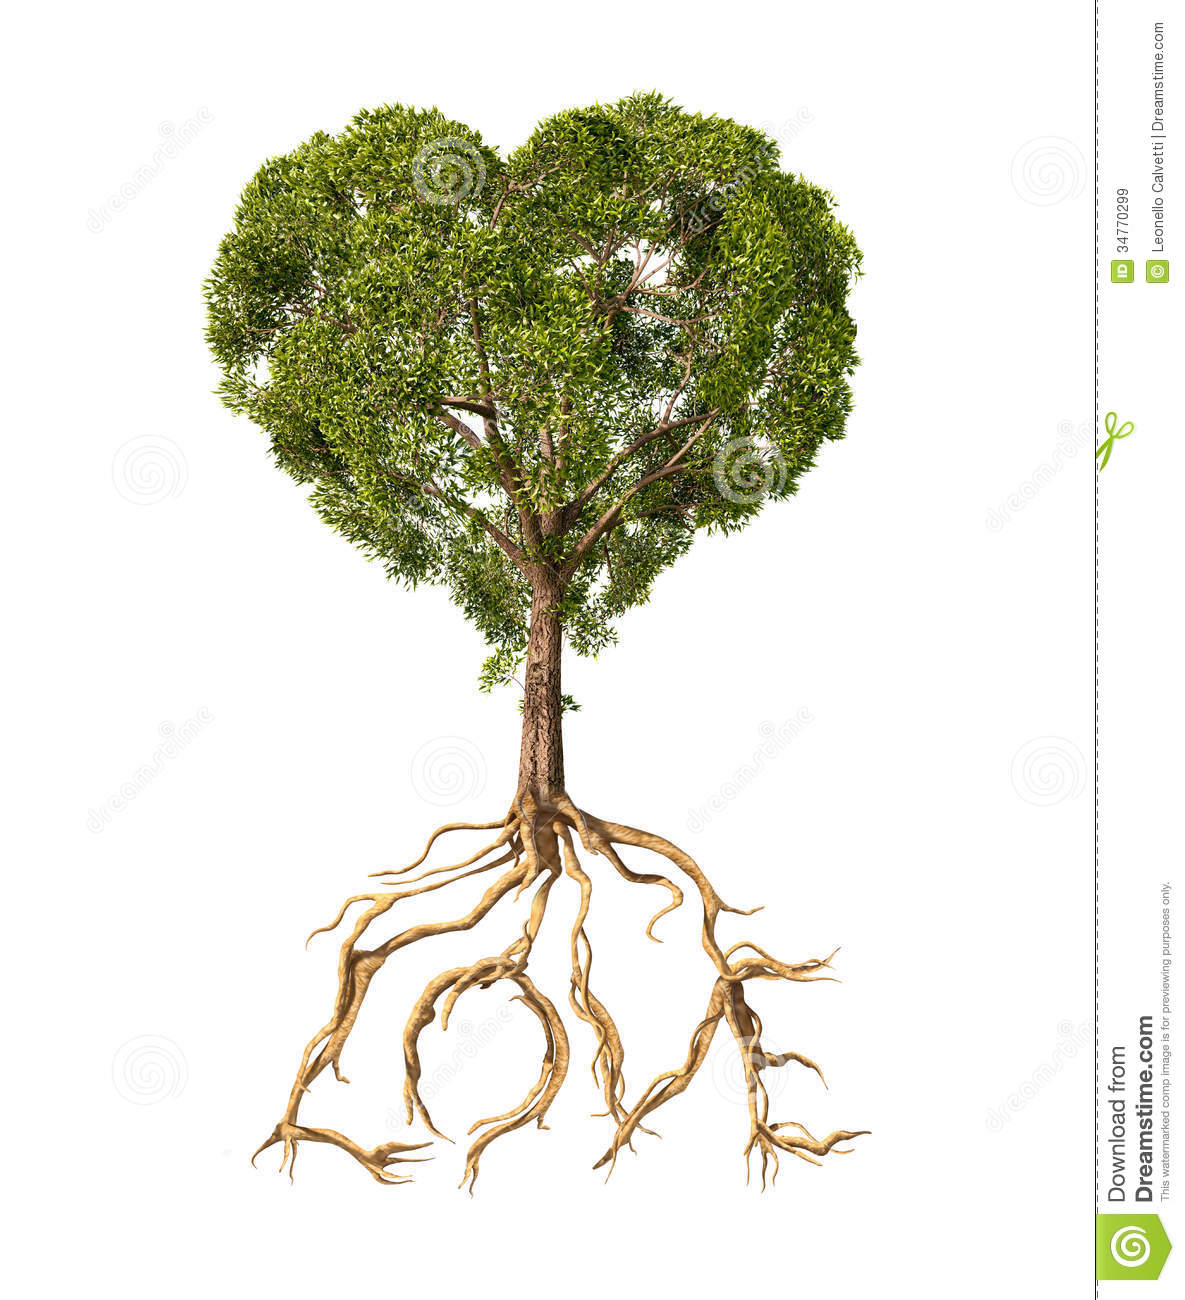 Tree With Foliage With The Shape Of A Heart And Roots As Text Love  On